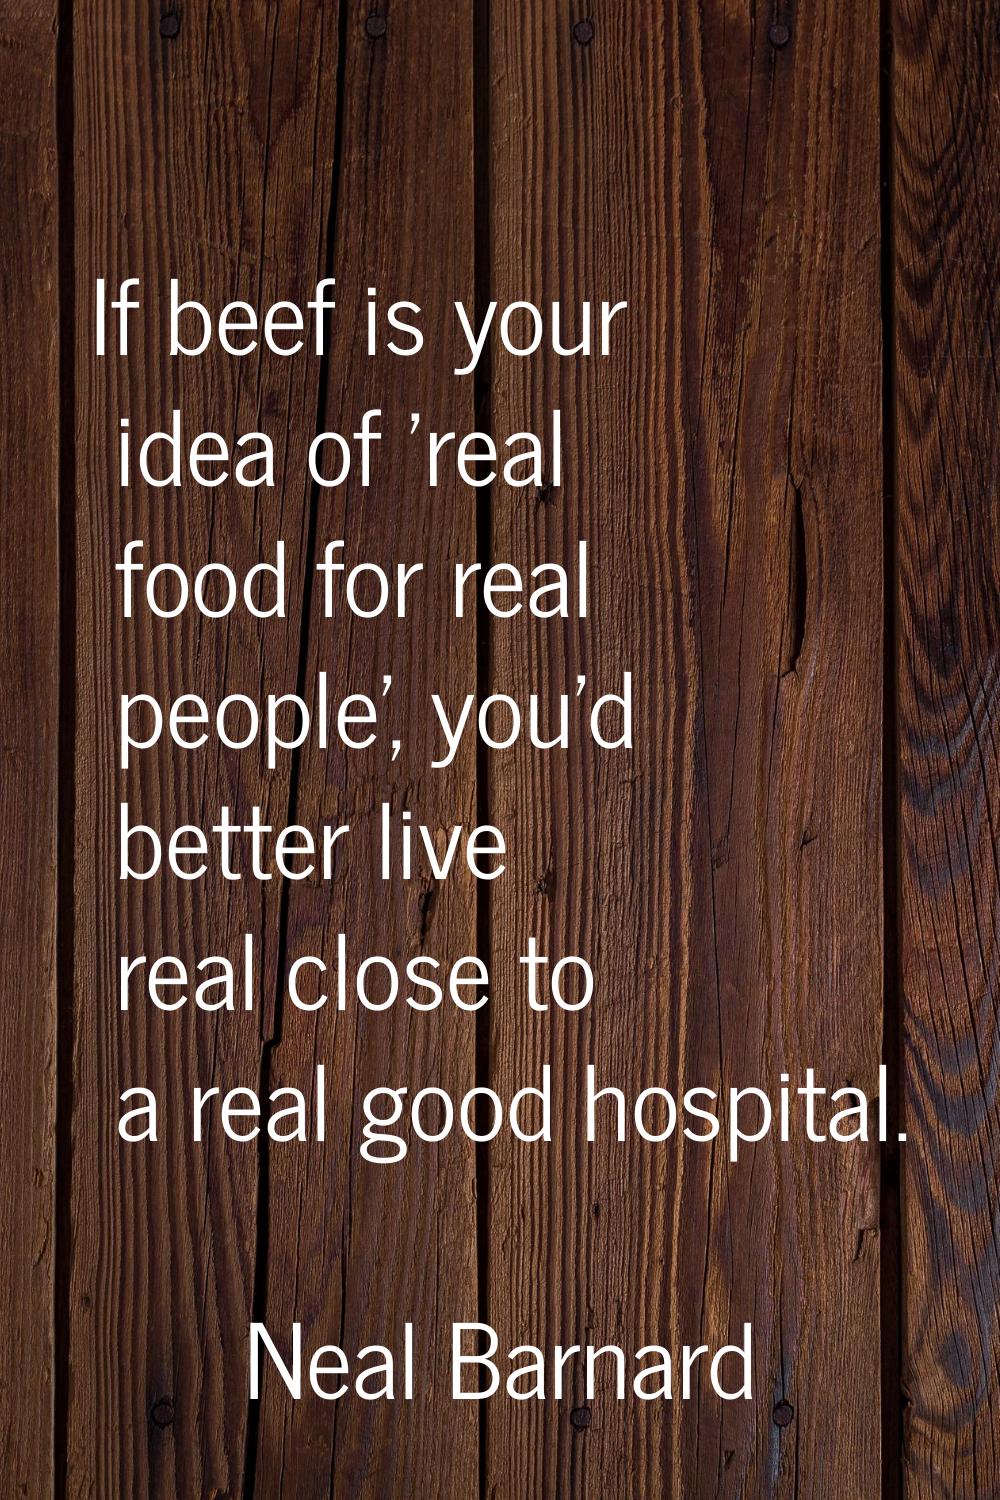 If beef is your idea of 'real food for real people', you'd better live real close to a real good ho